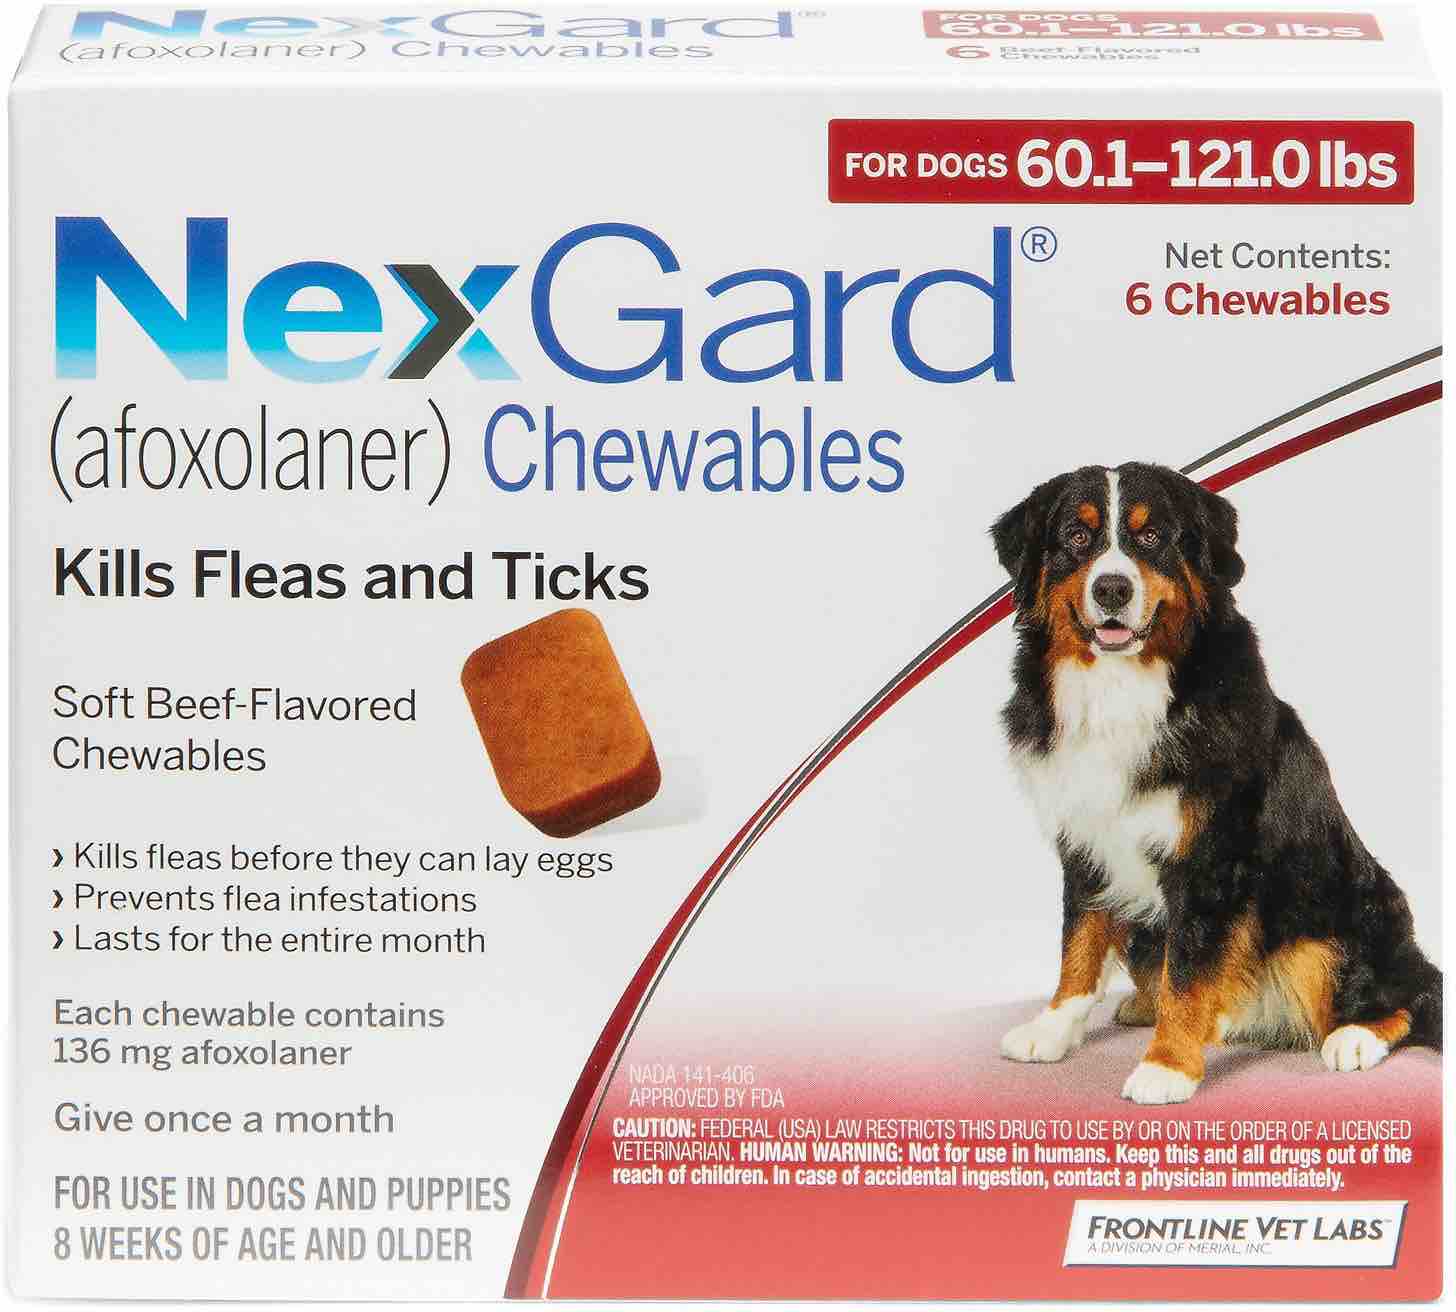 NexGard 6 chewables for dogs 60.1-121 lbs (Red) 1